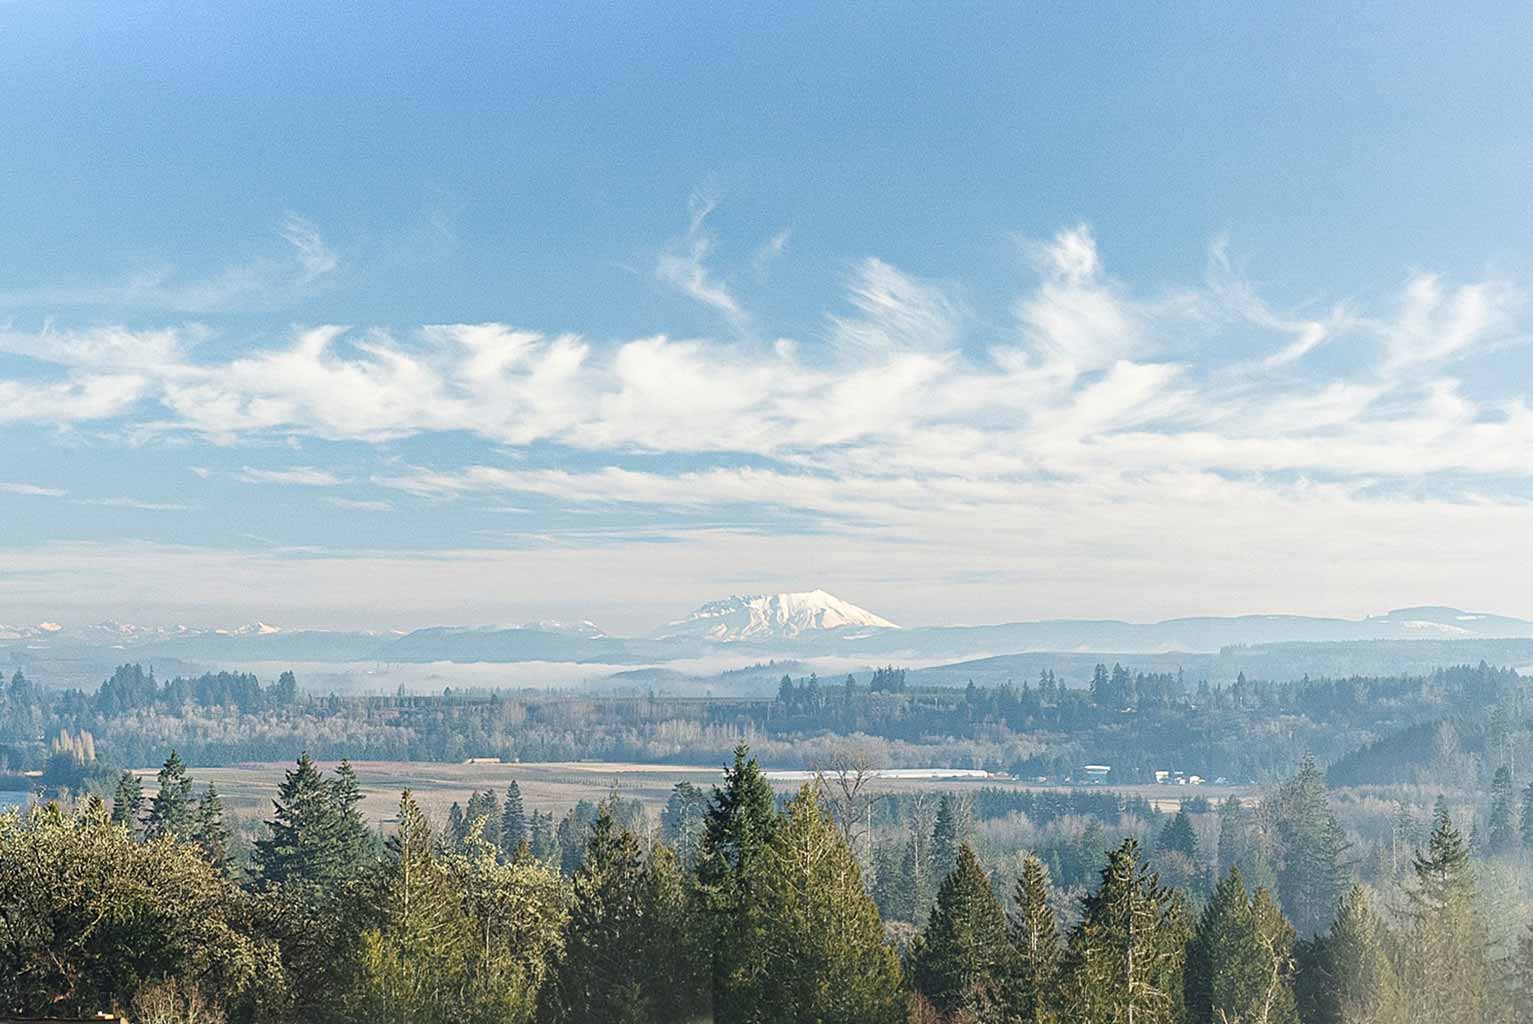 Sweeping views of Mount St. Helens and the Cowlitz River valley